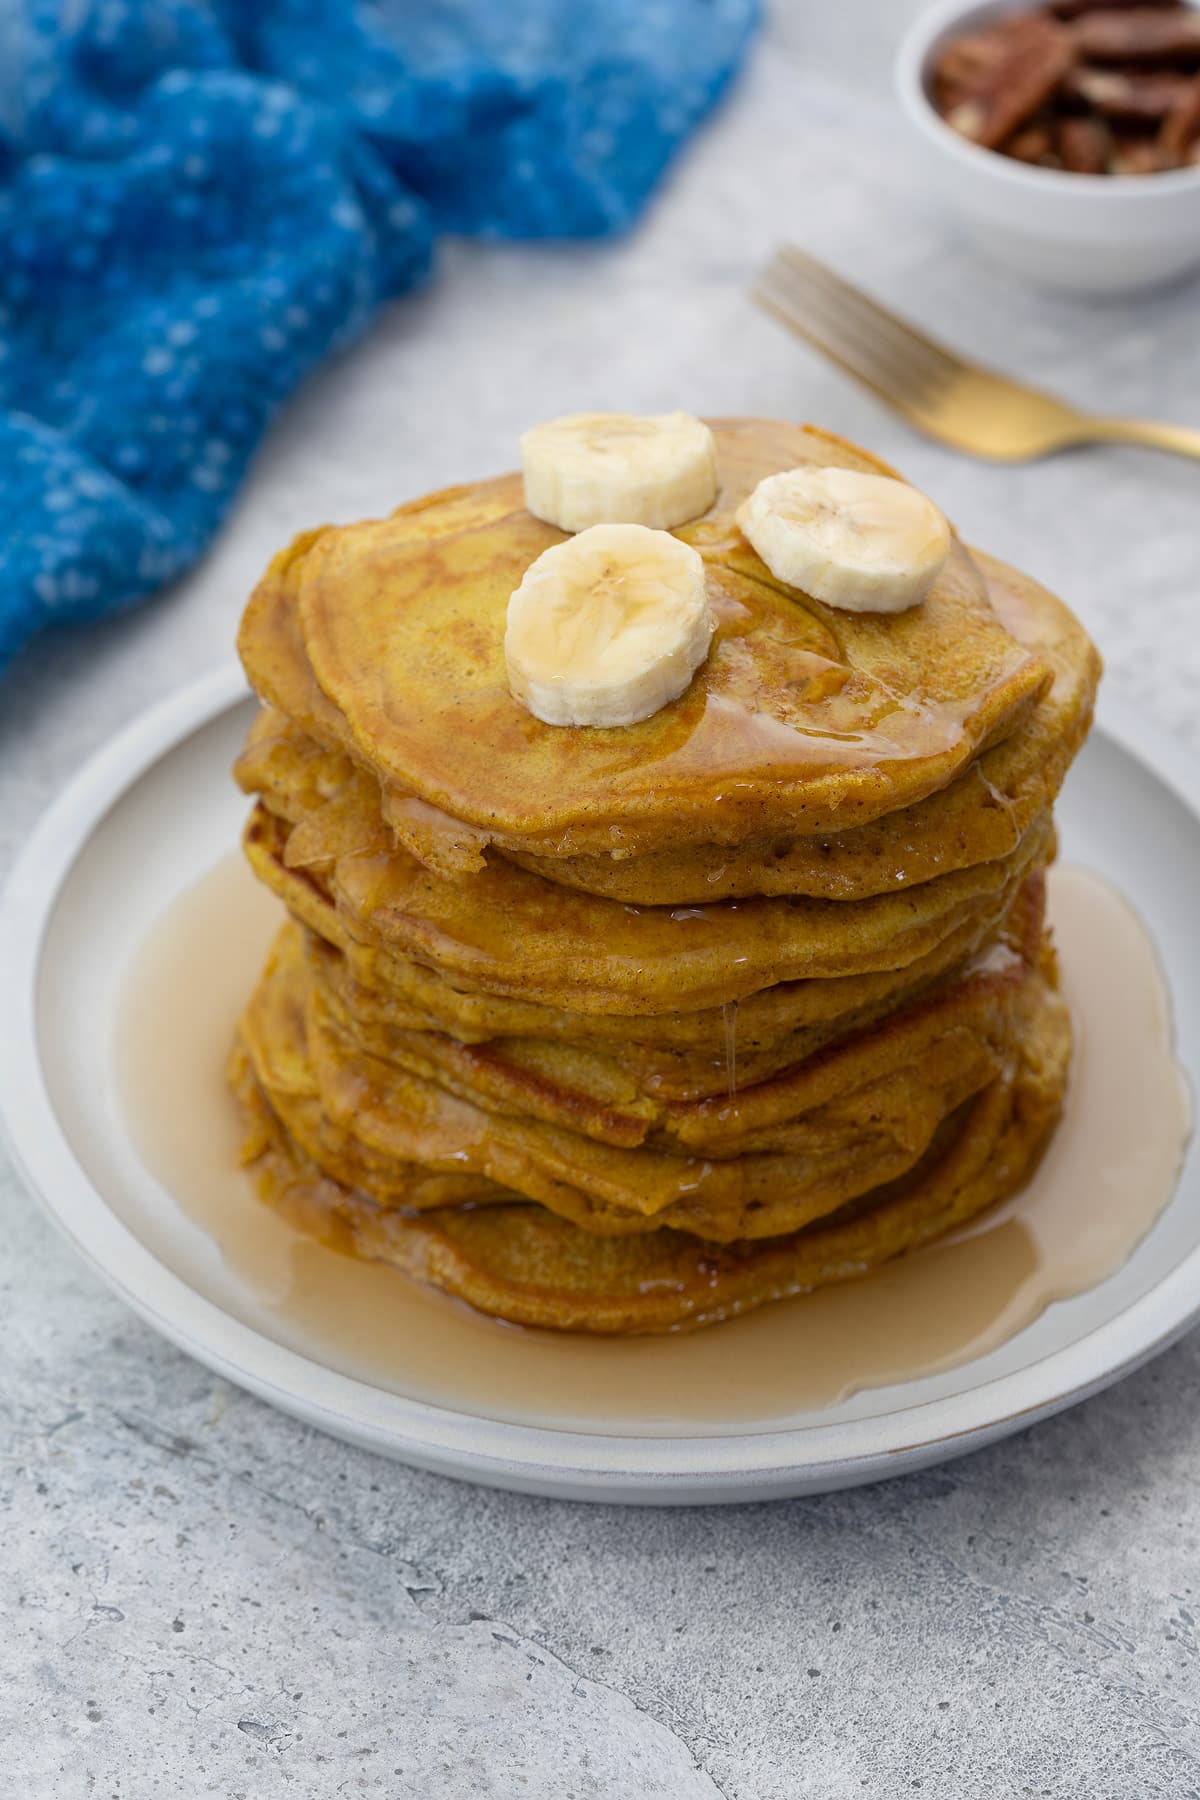 Pumpkin pancake on a white plate, topped with banana slices and drizzled with maple syrup. Beside it is a blue towel, a golden fork, and a cup of nuts.